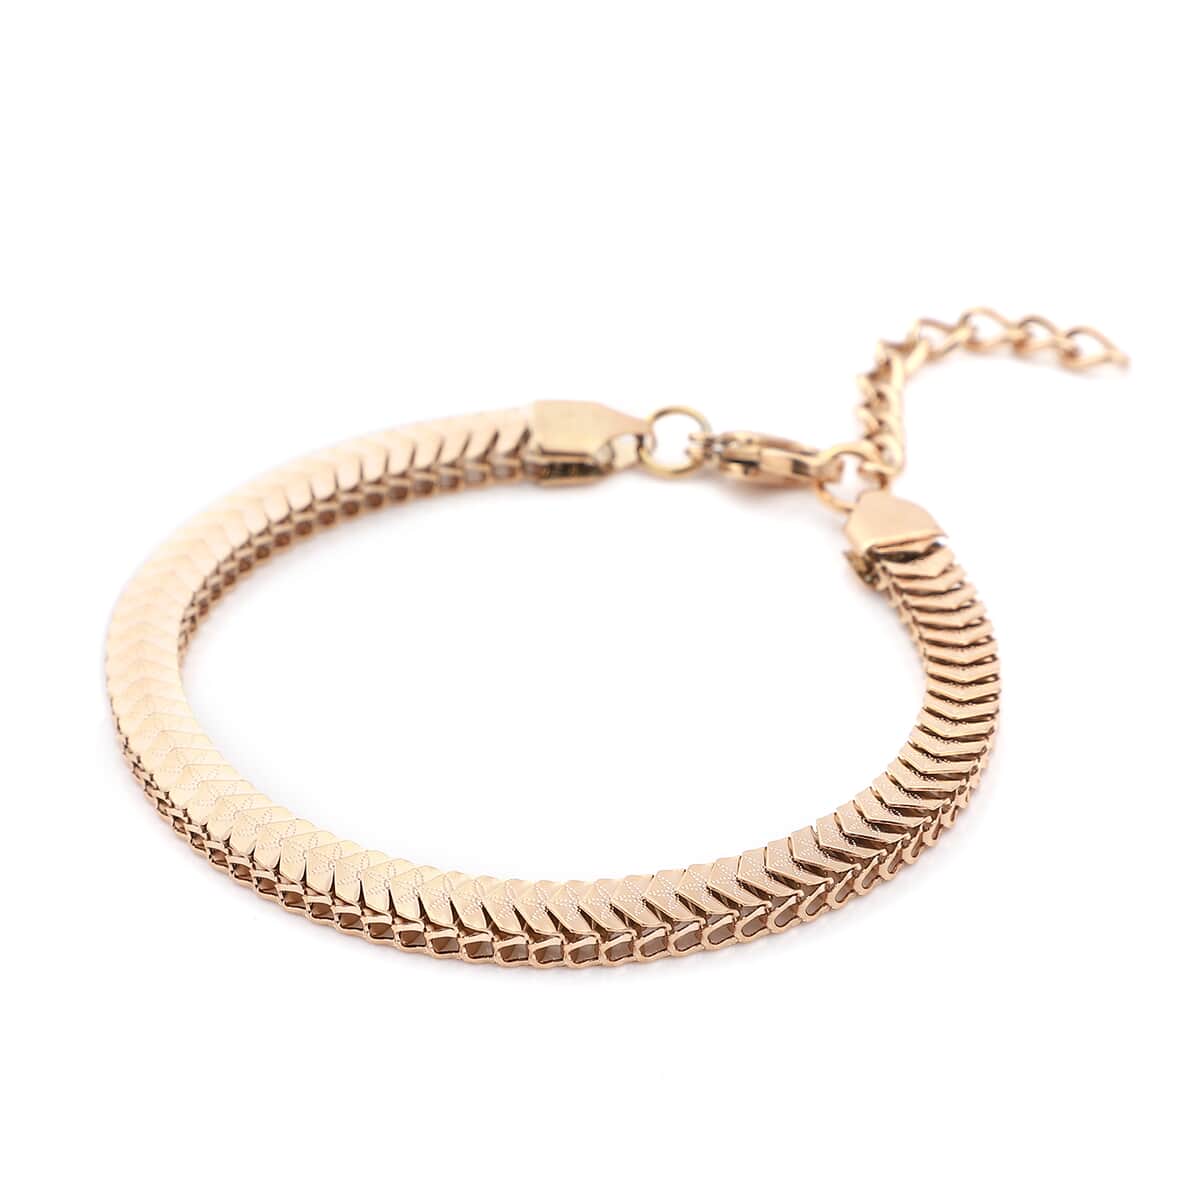 Herringbone Chain Bracelet in ION Plated Rose Gold Stainless Steel (7.5-9.0In) image number 2